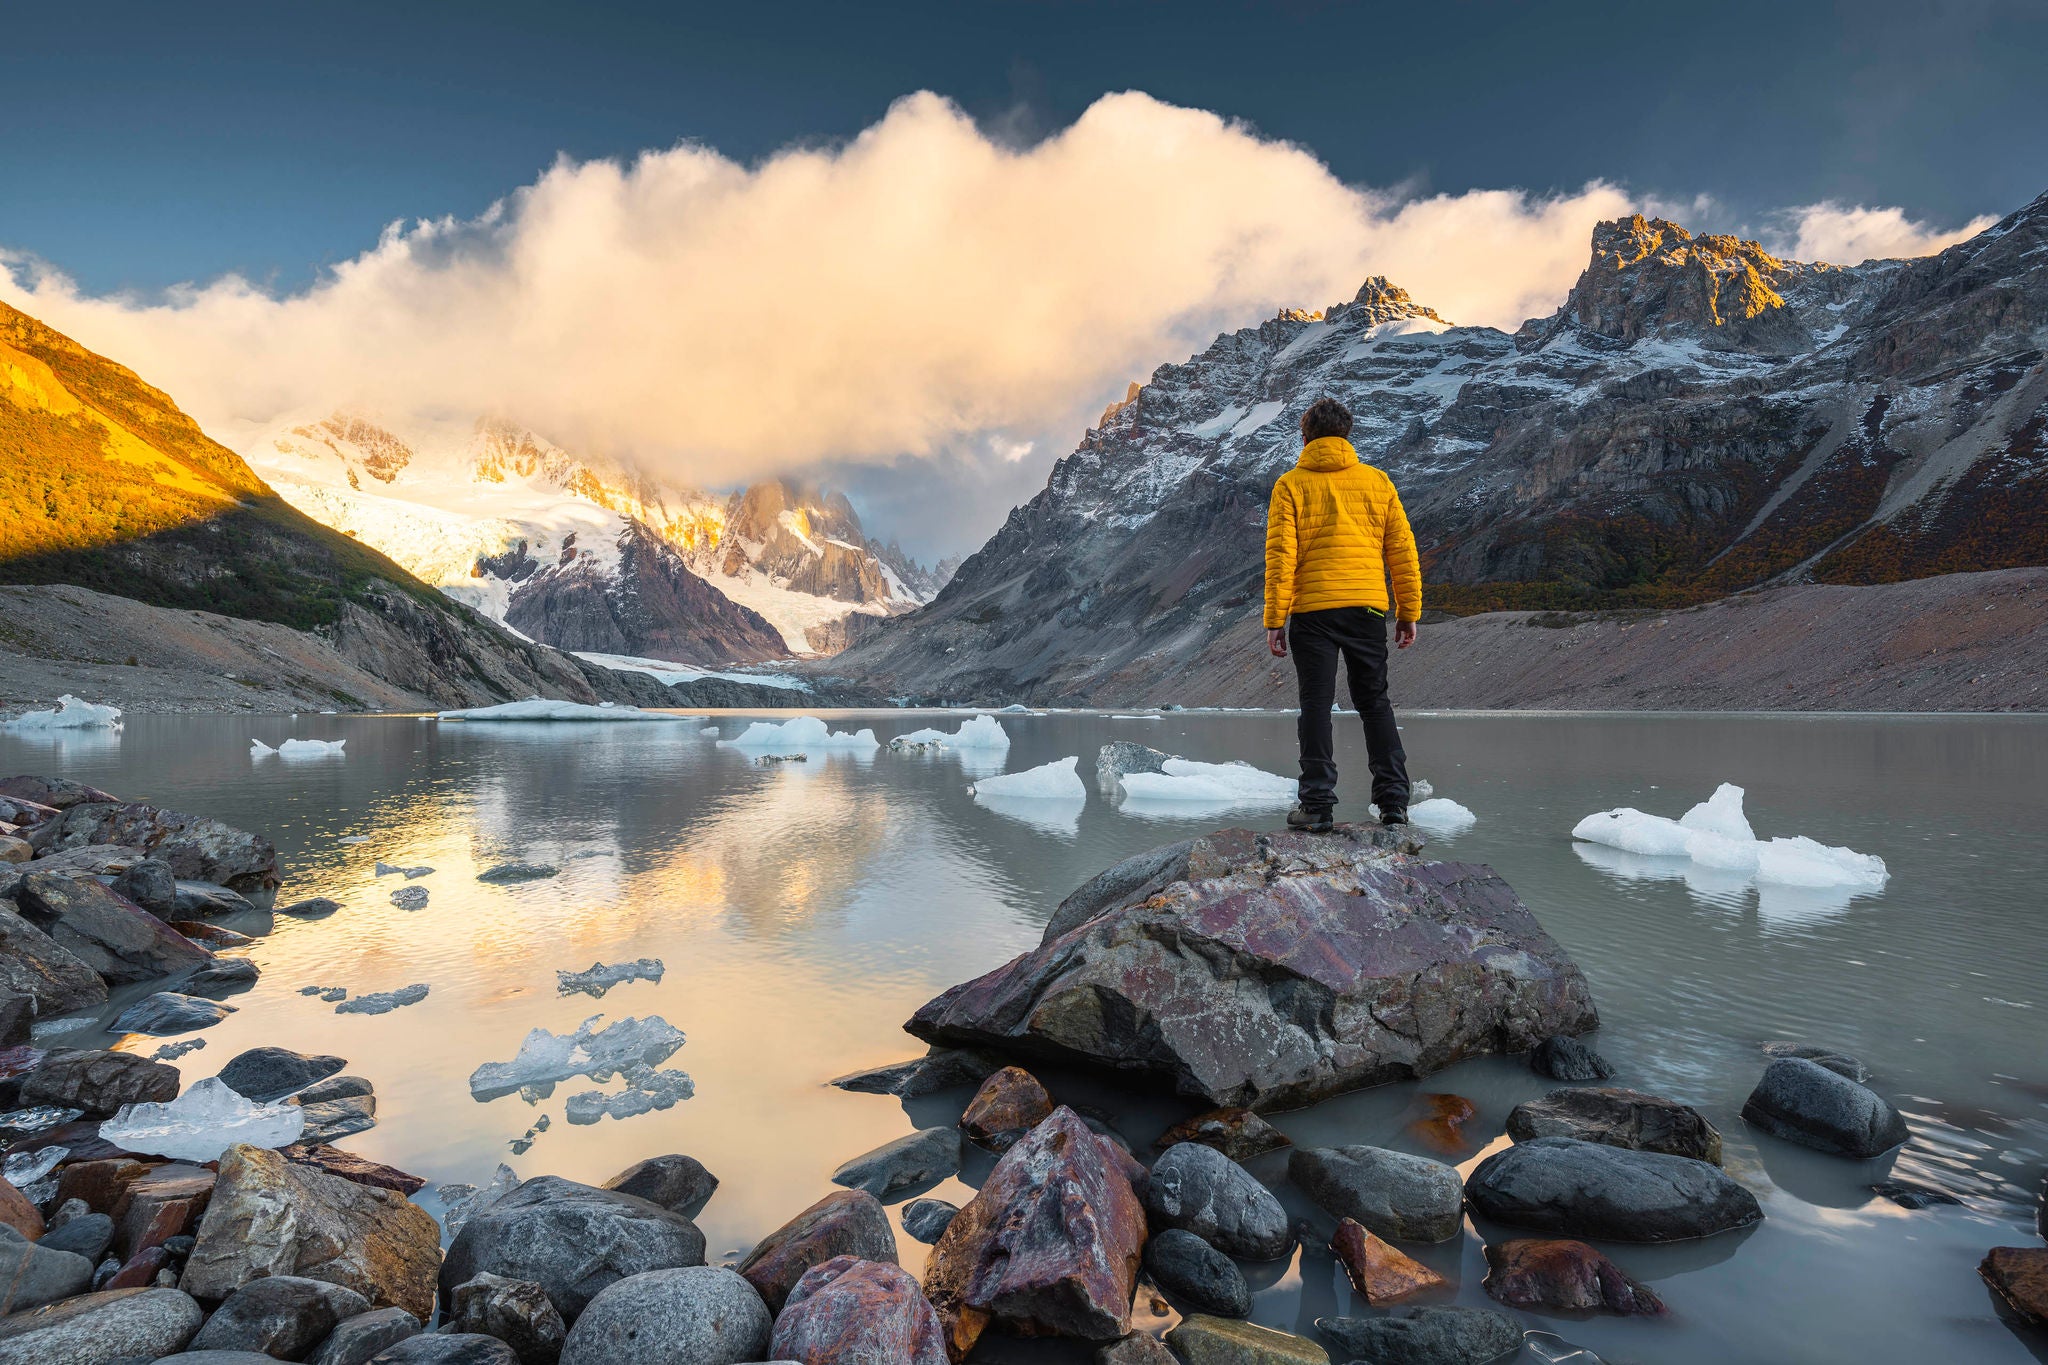 Man looking at view at sunrise in Los Glaciers national park, Argentina